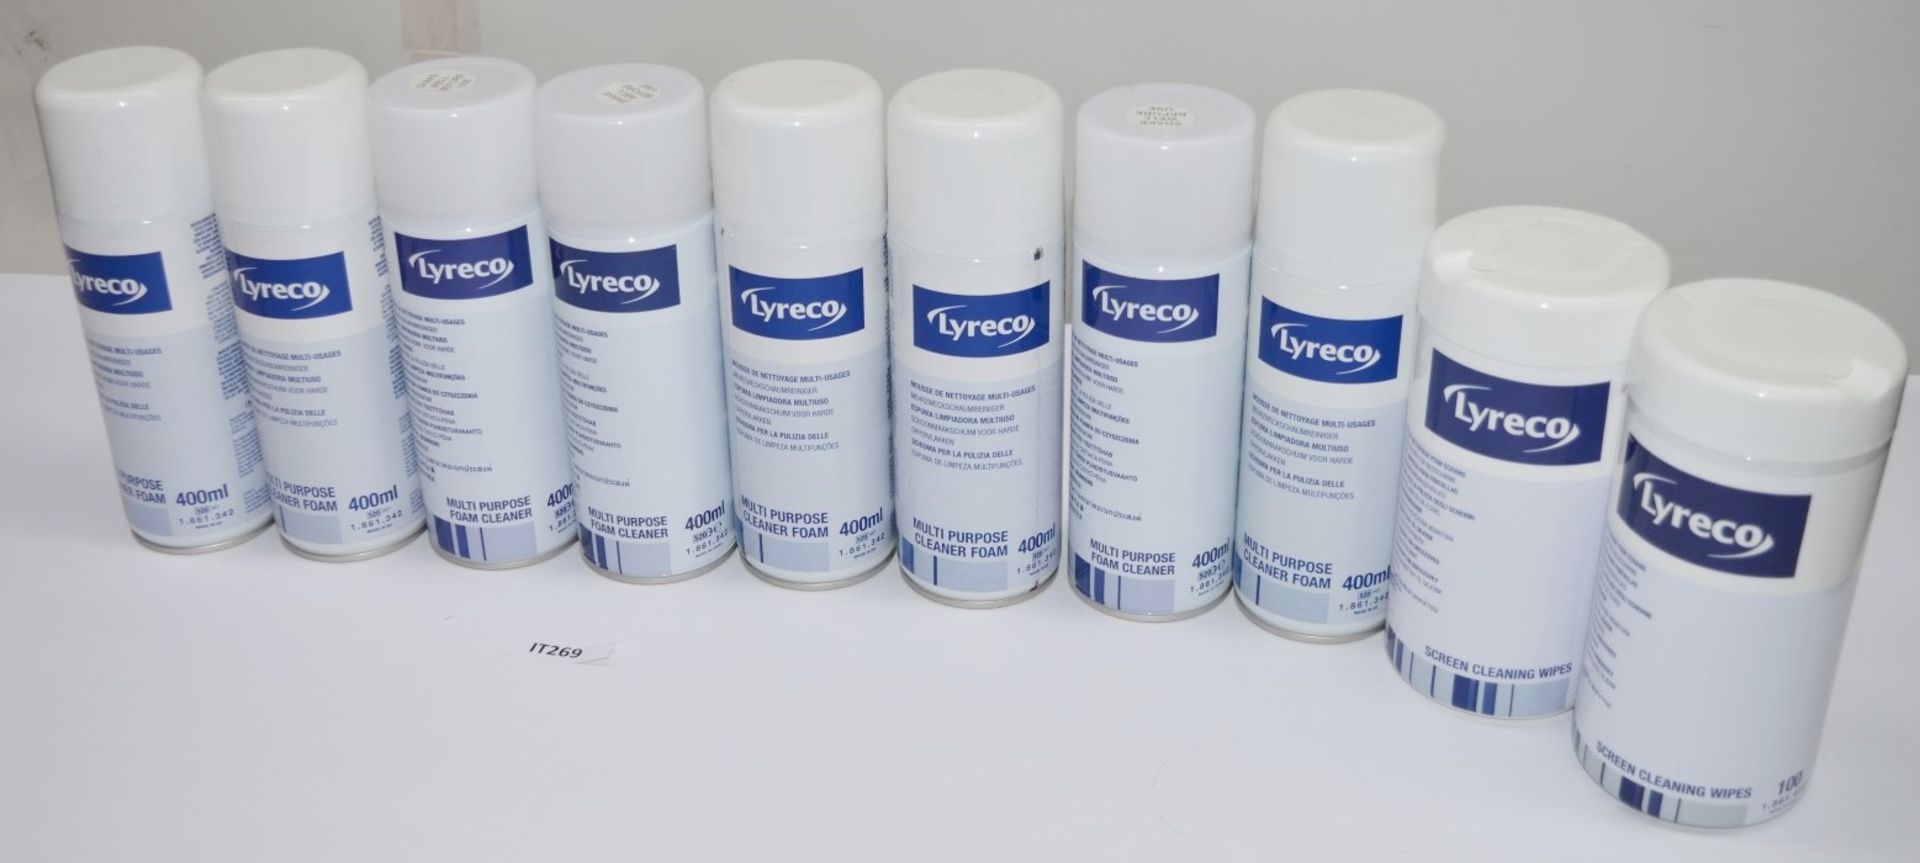 10 x Packs of Lyreco Multipurpose Foam Cleaner and Screen Cleaning Wipes - Unused Stock - CL400 -